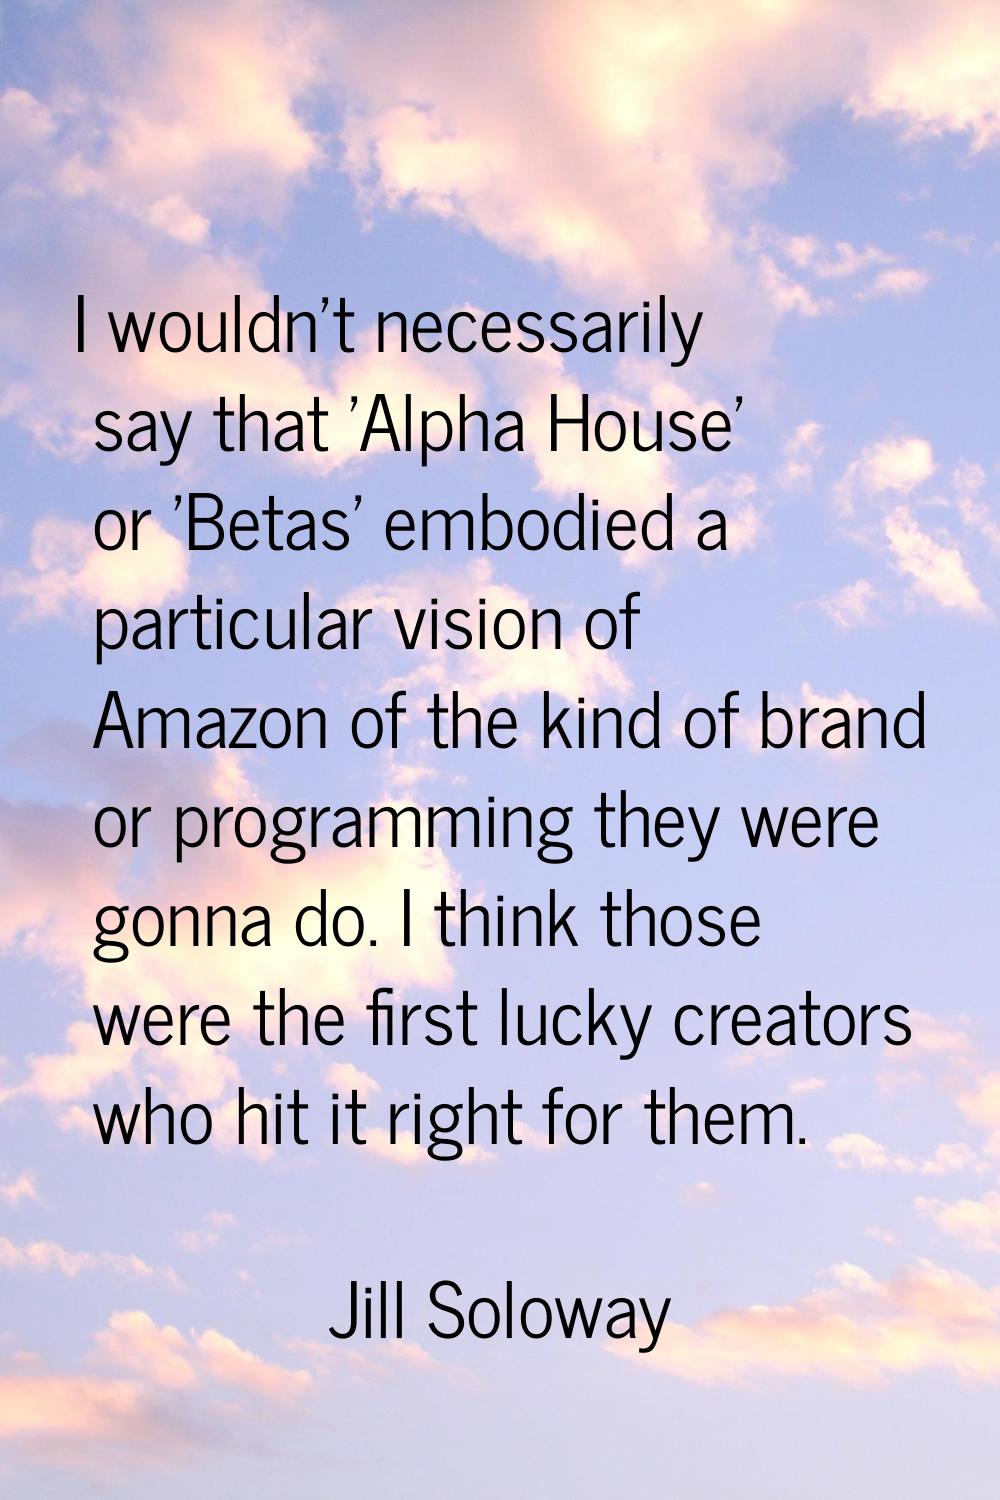 I wouldn't necessarily say that 'Alpha House' or 'Betas' embodied a particular vision of Amazon of 